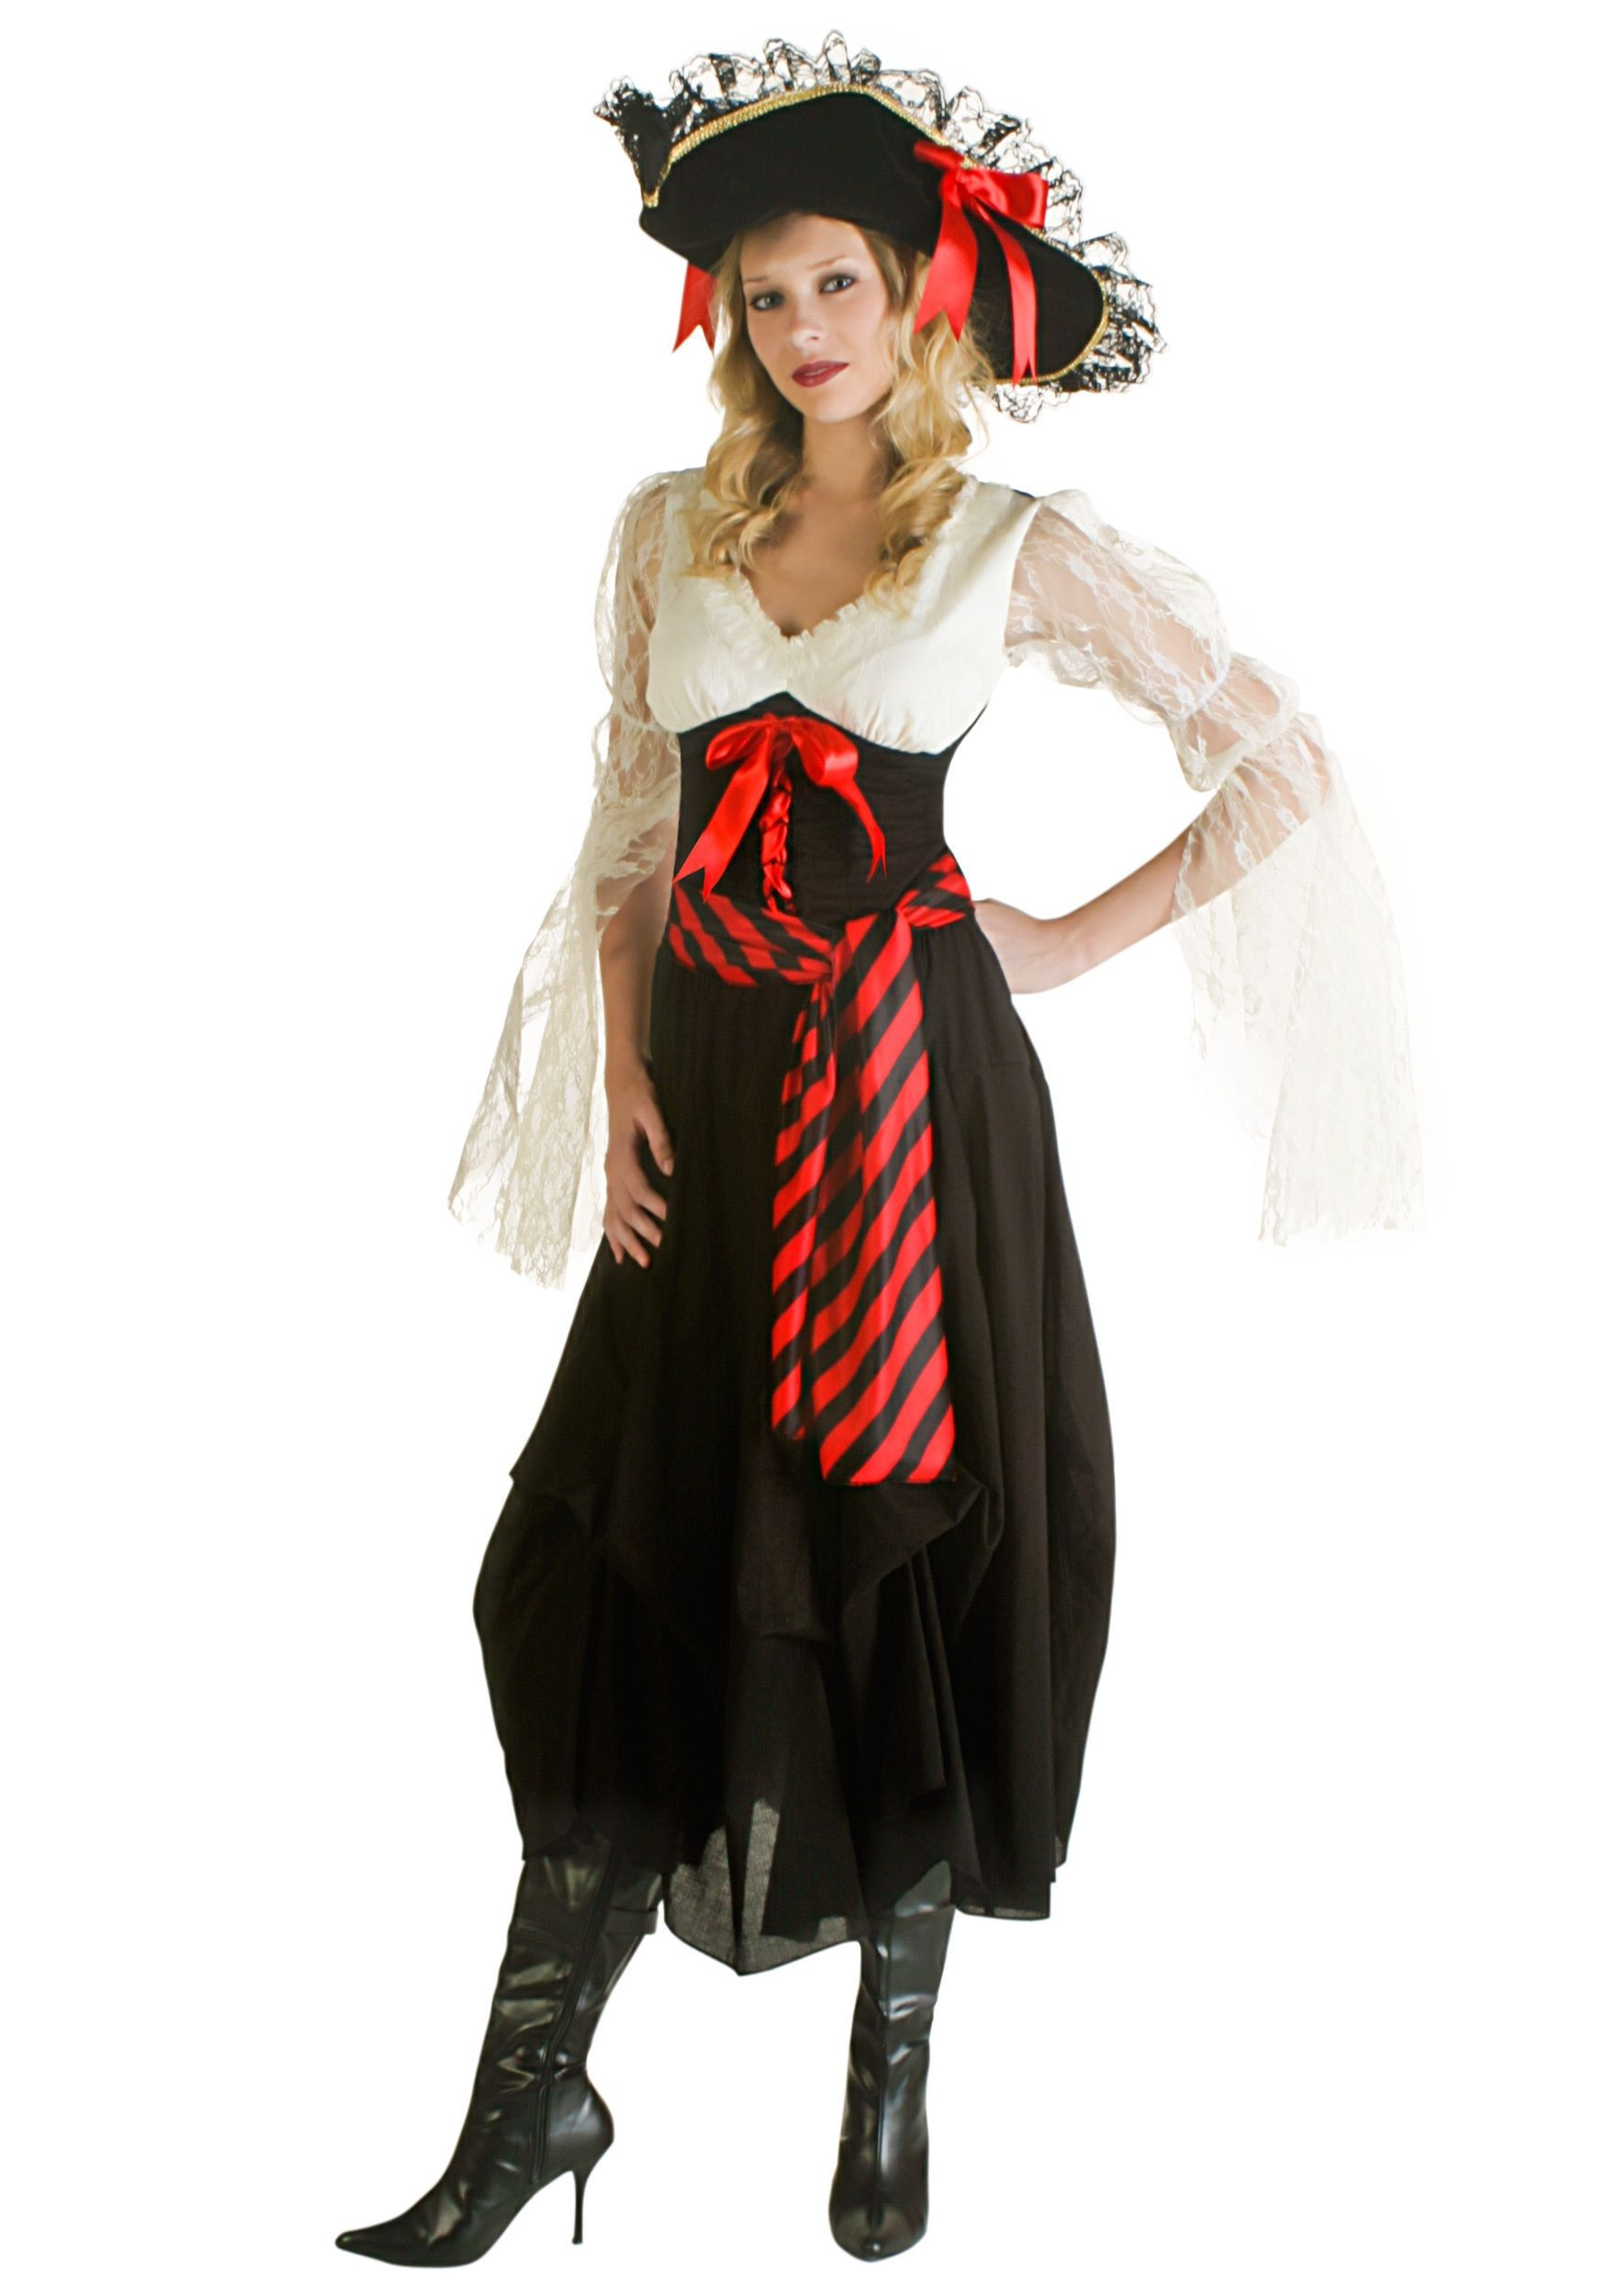 Woman Pirate Costume DIY
 Pin on Sewing projects